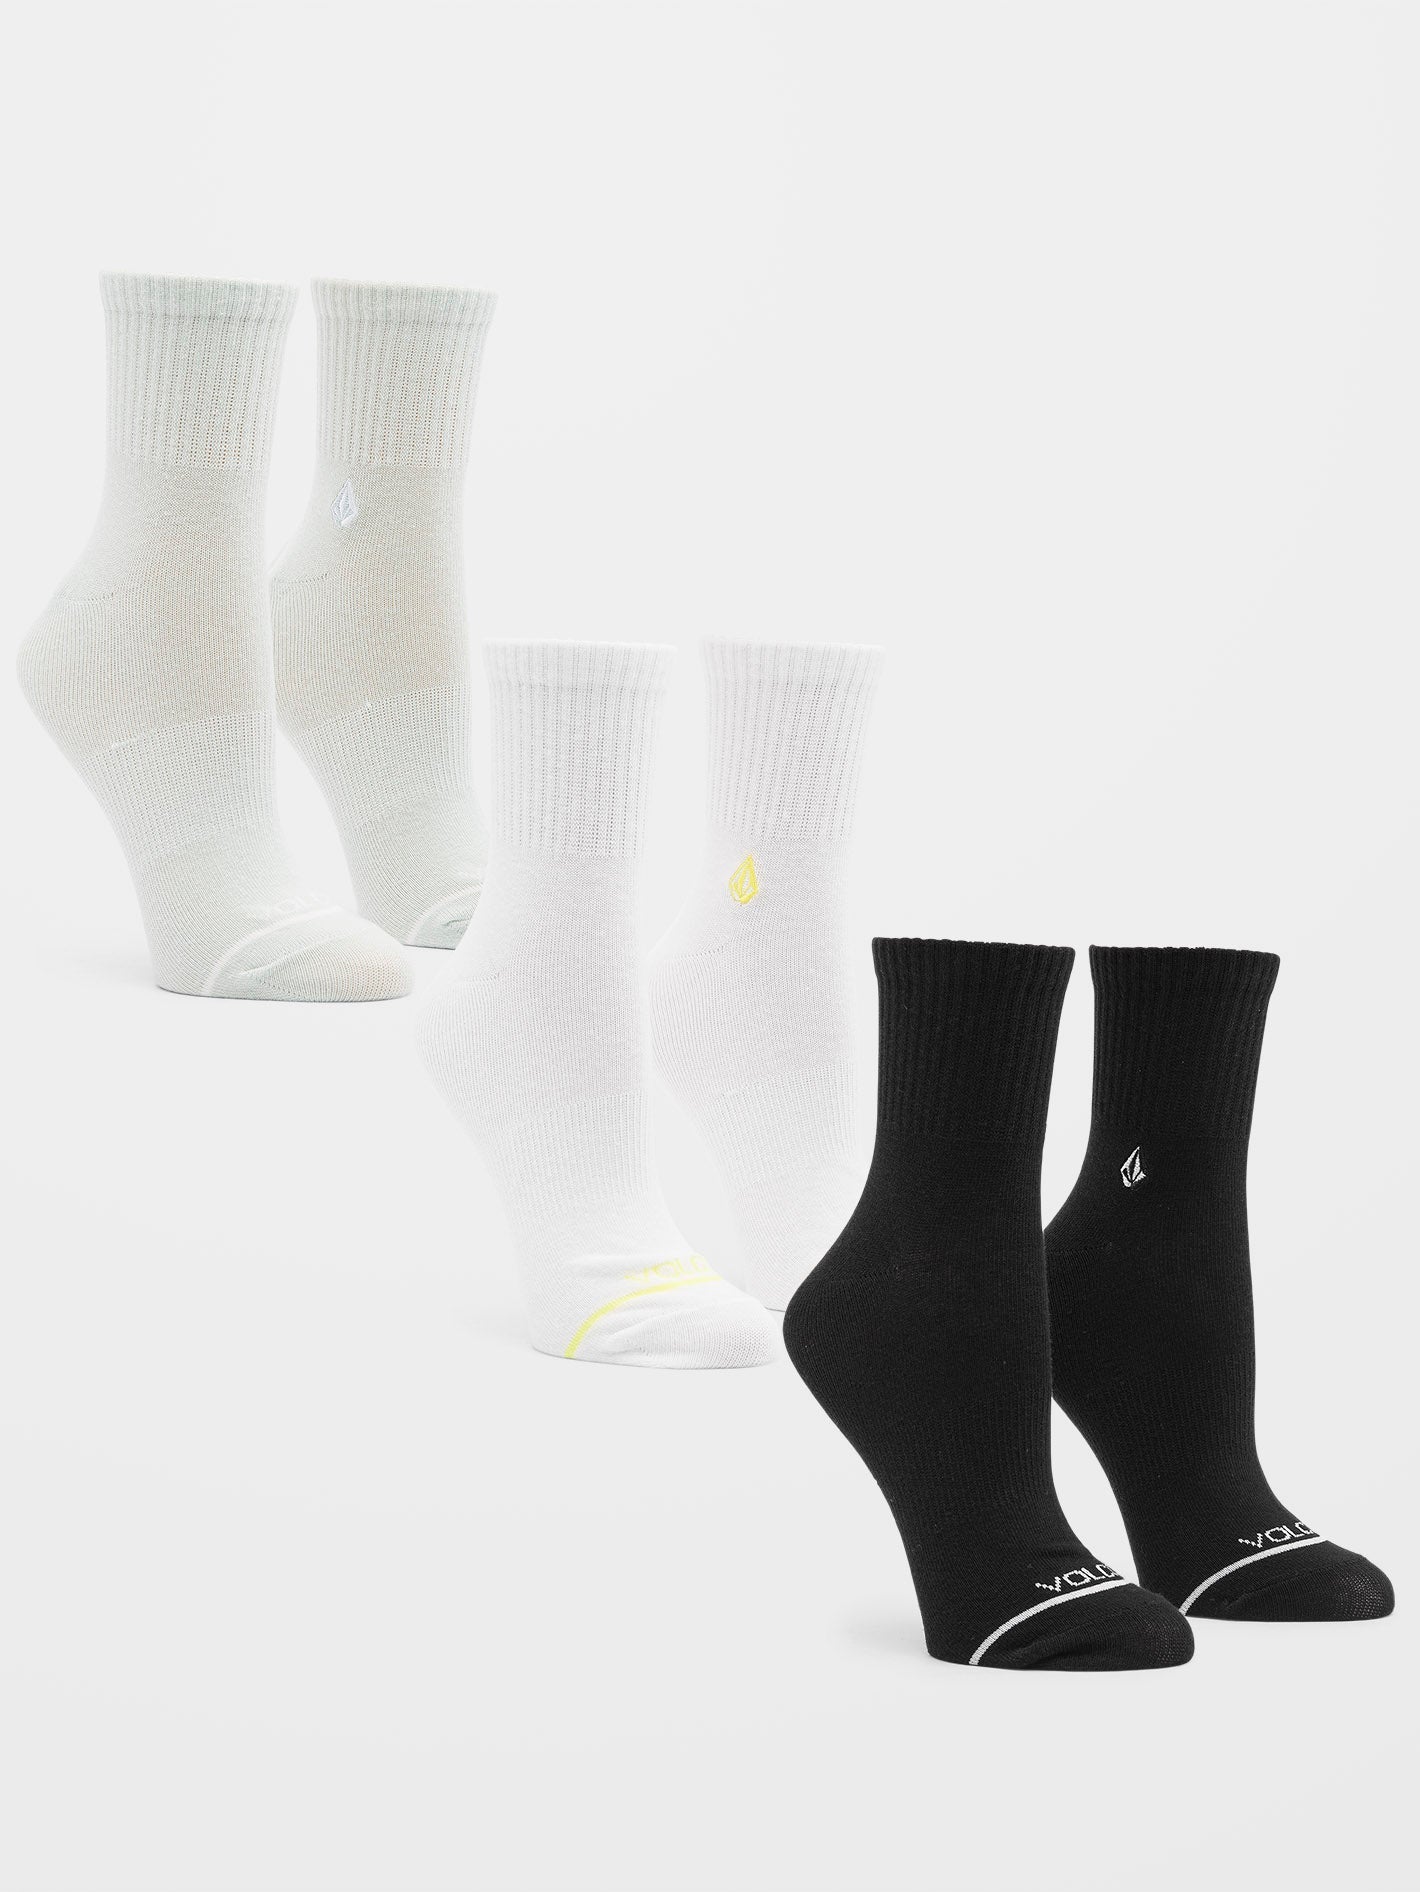 The New Crew Socks (3 Pack) - ASSORTED COLORS